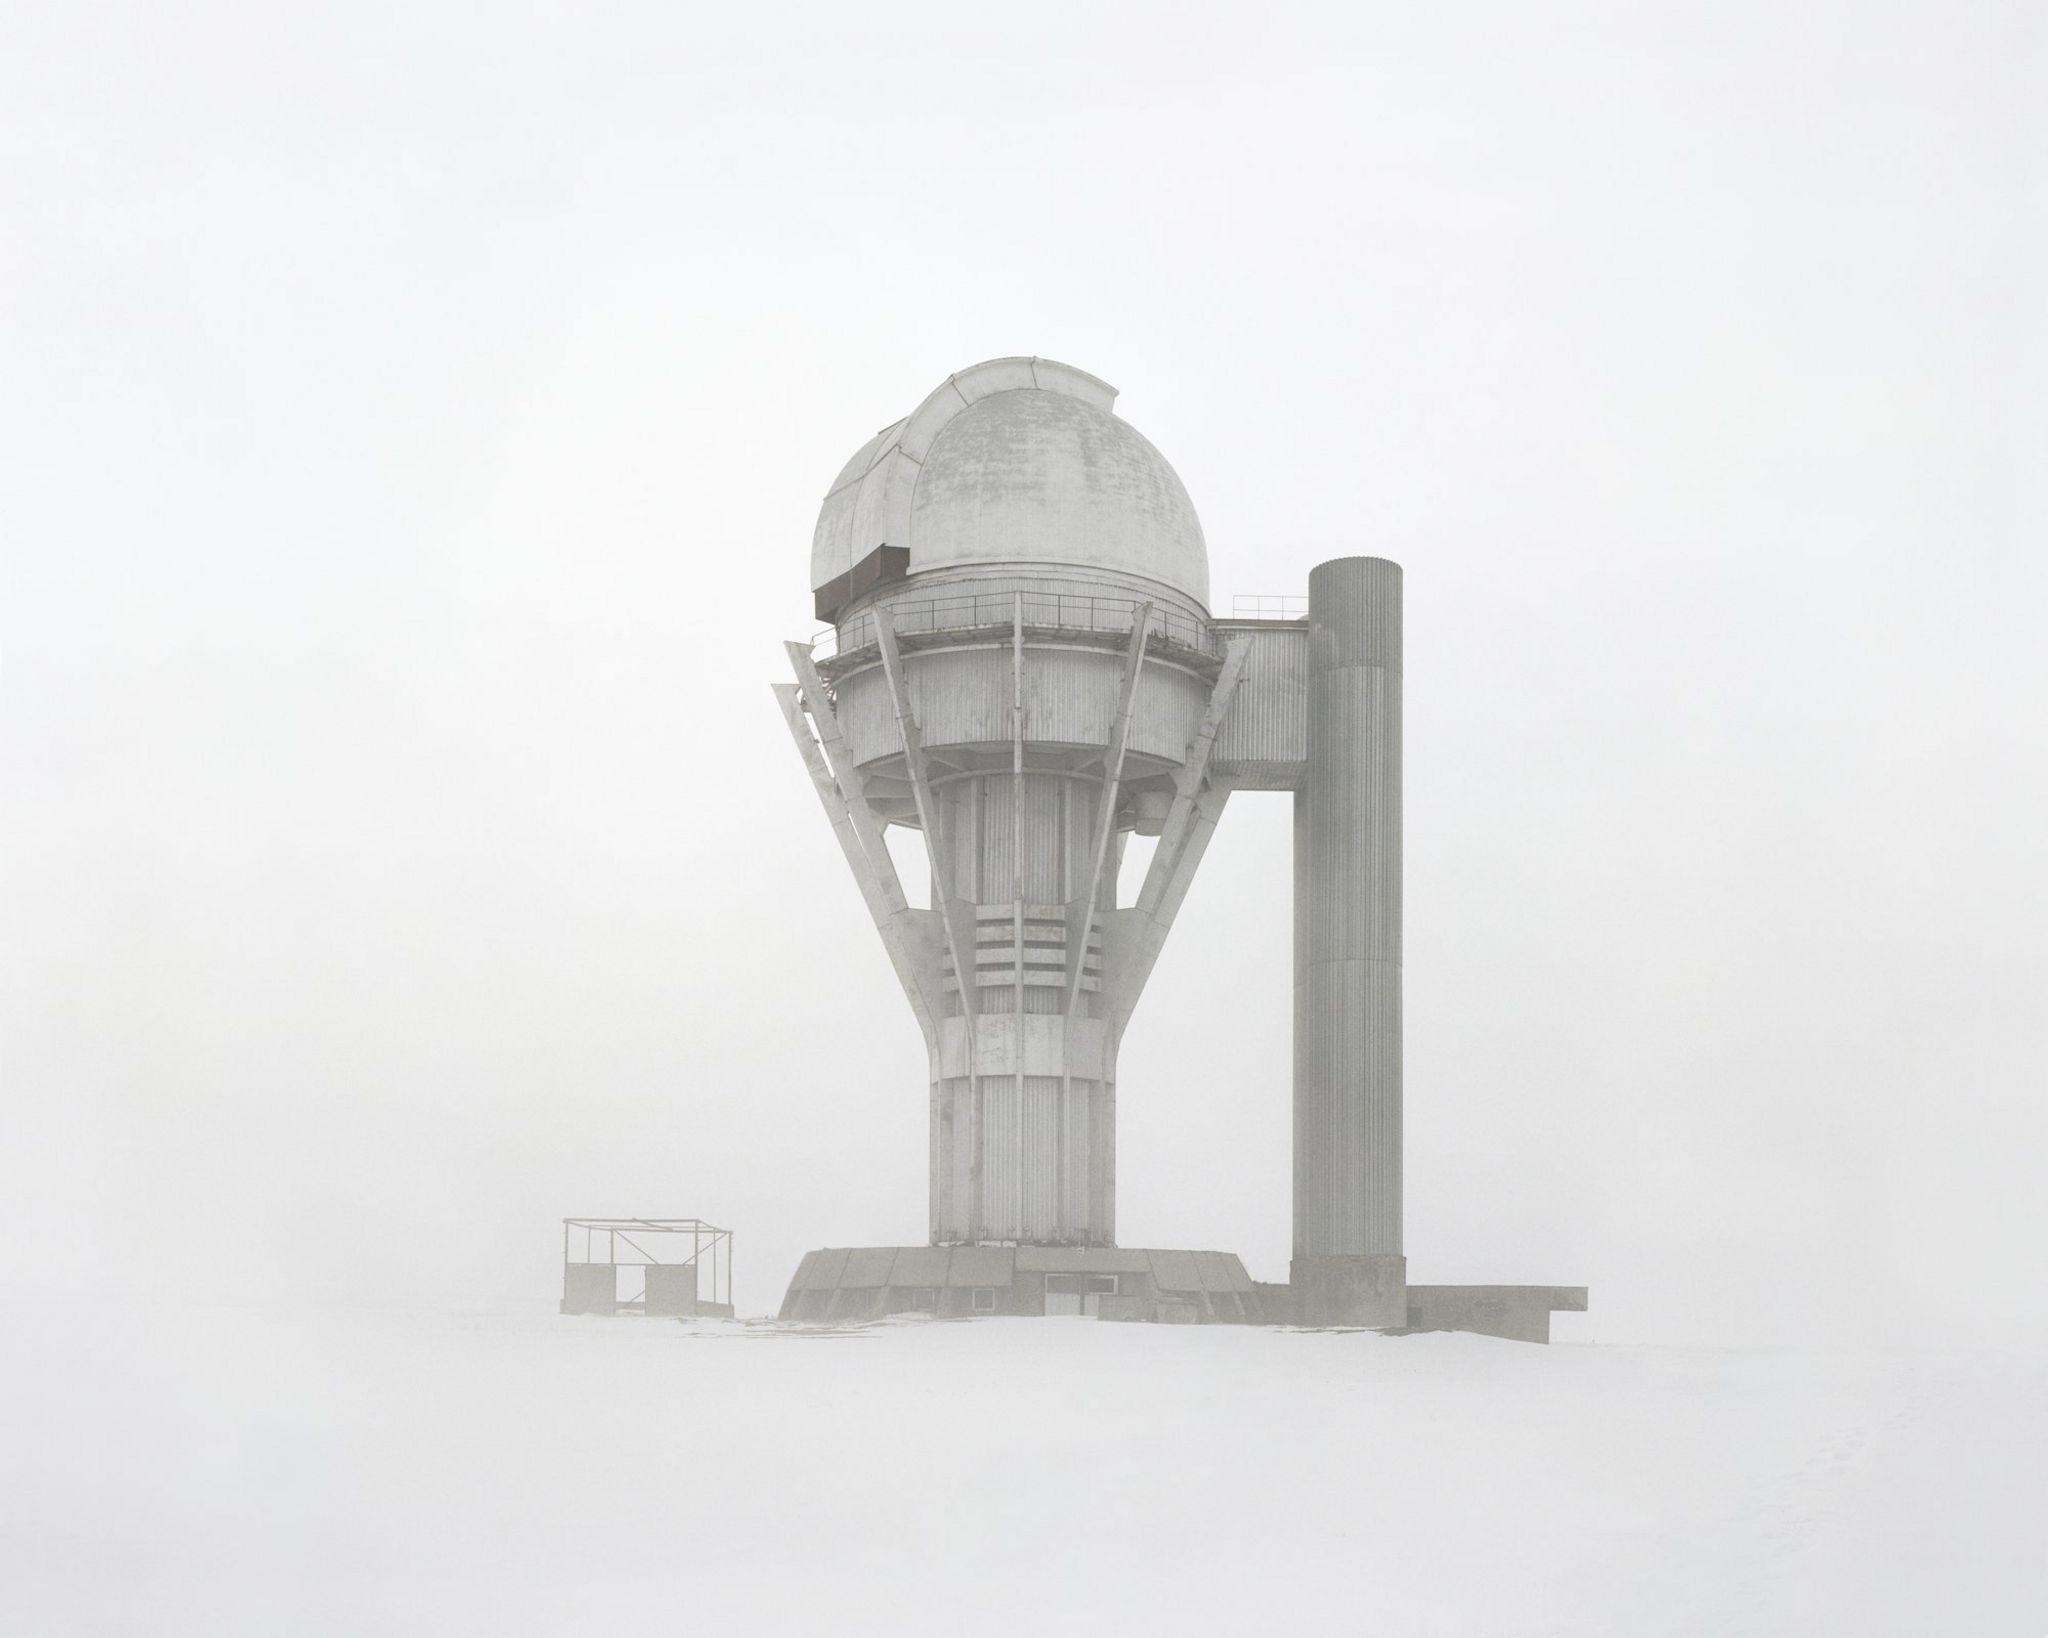 Restricted Areas - Deserted observatory